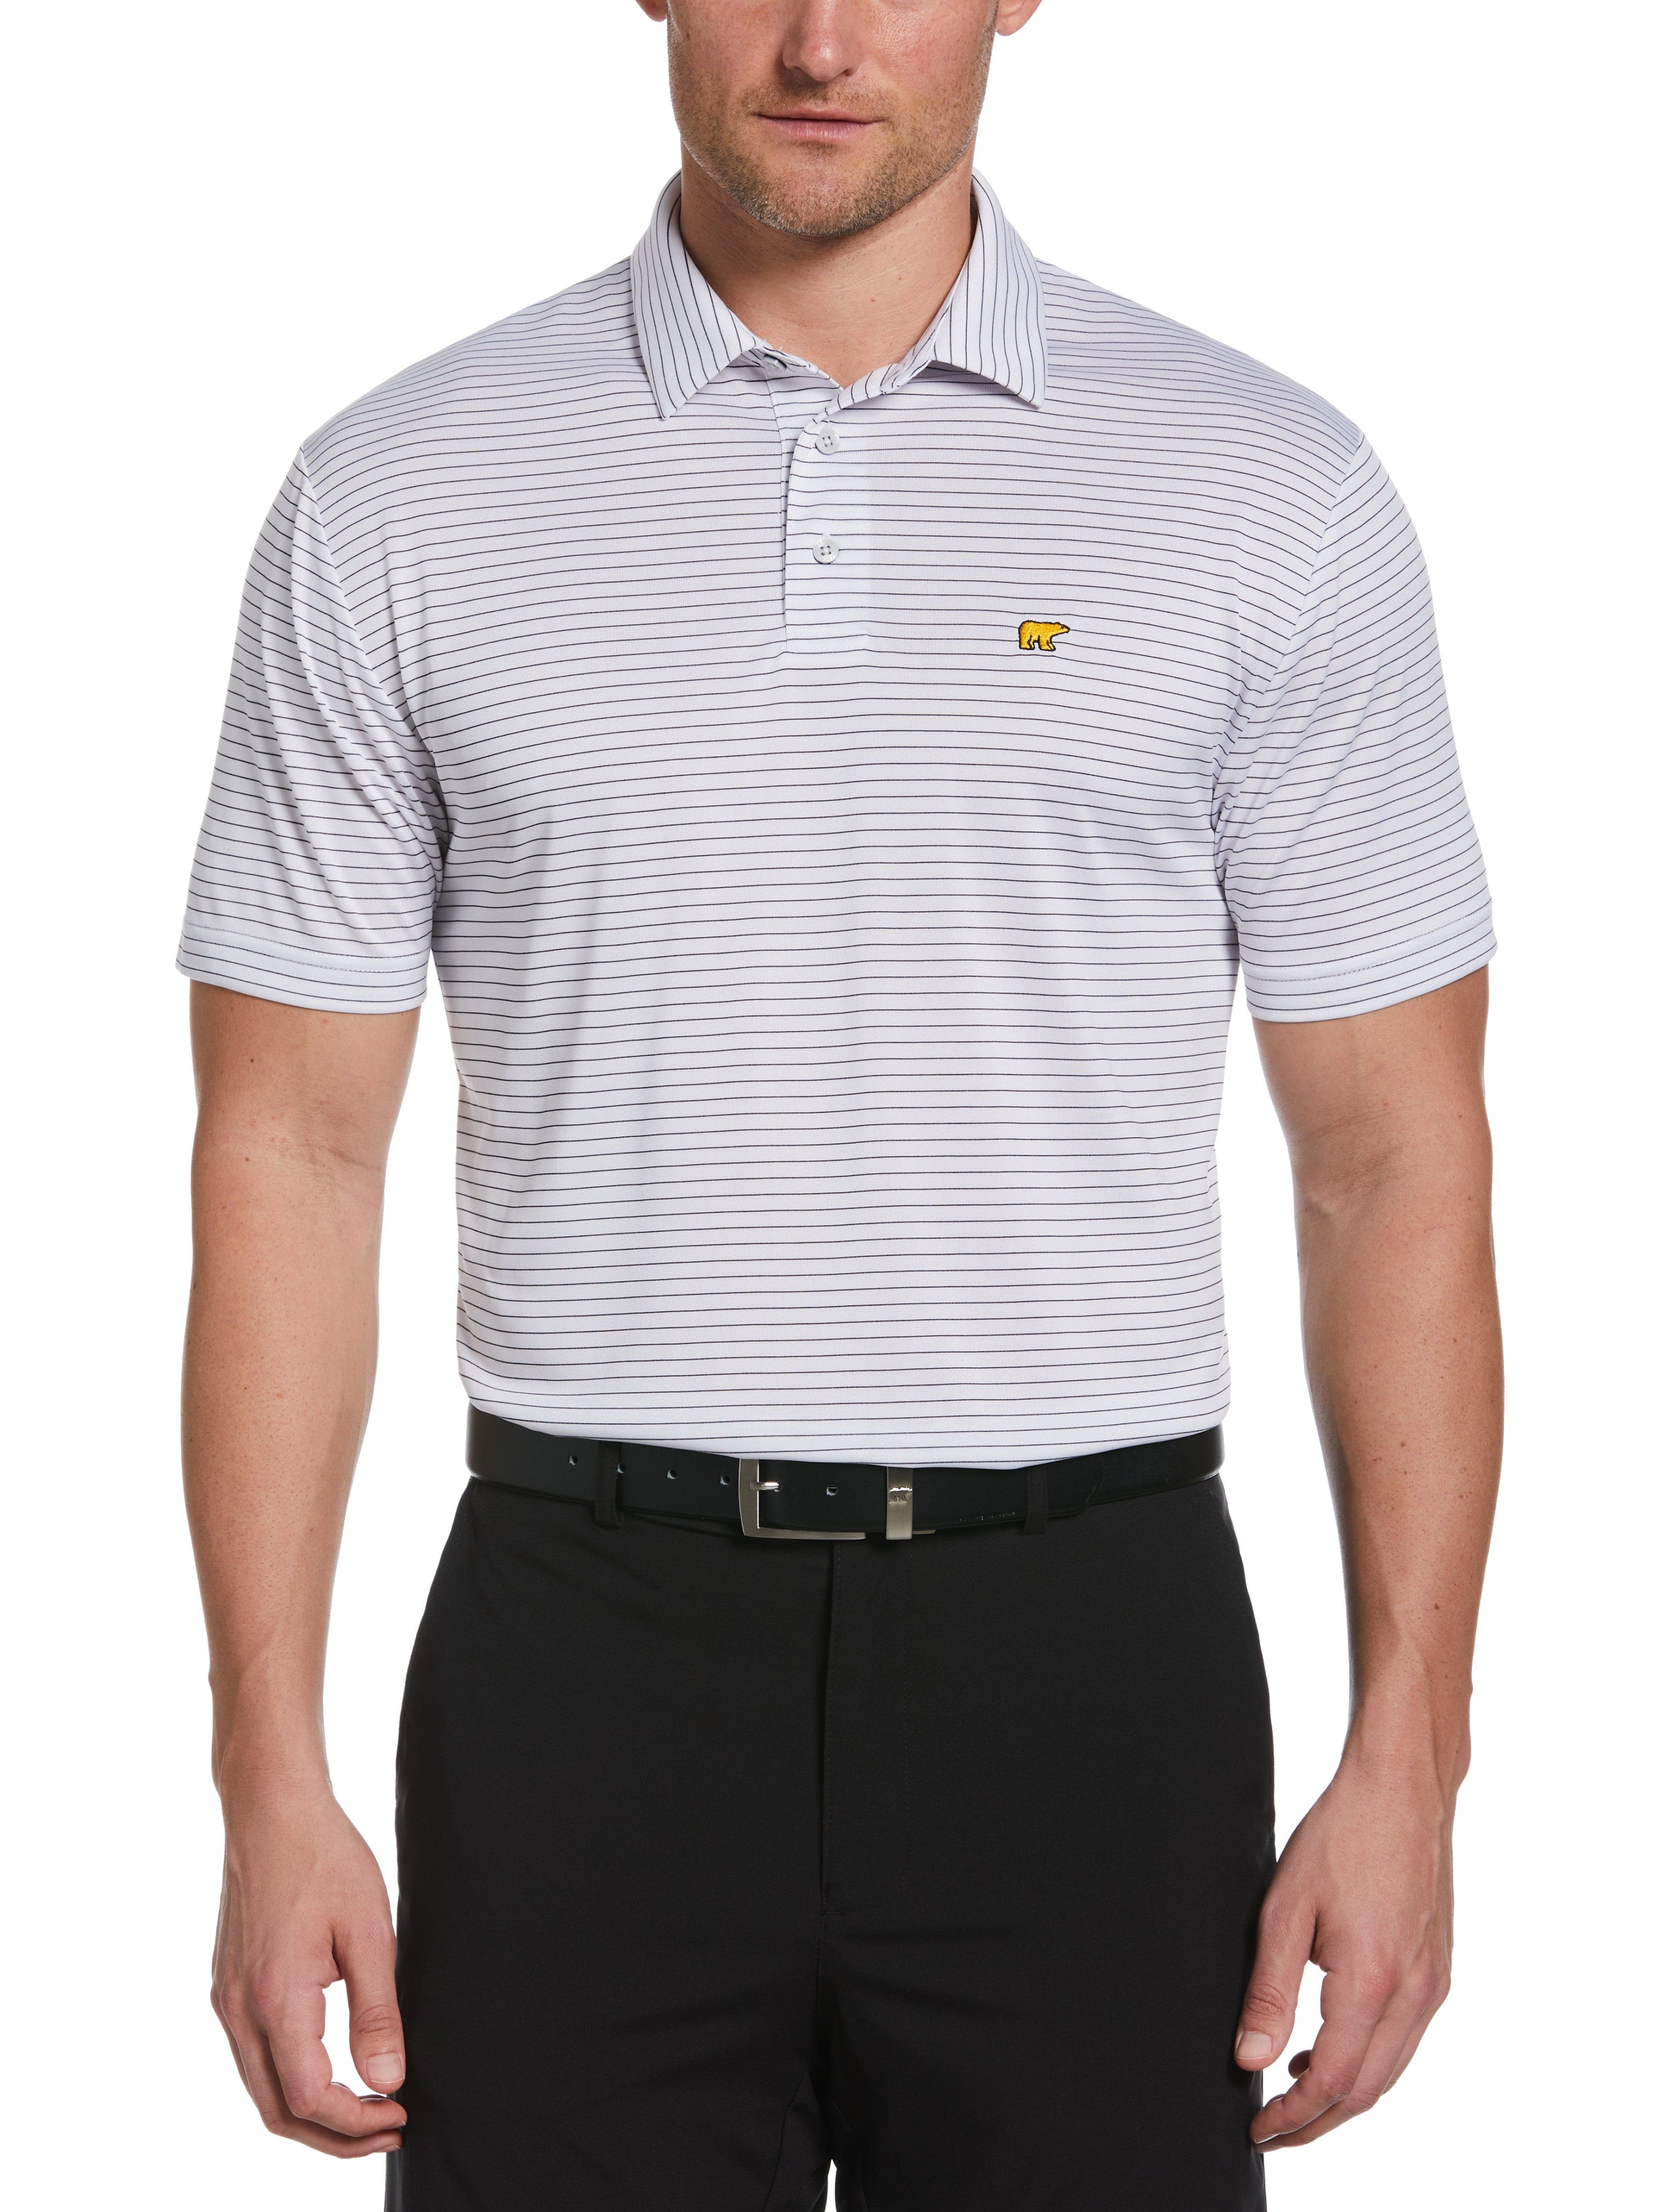 Jack Nicklaus Mens Two Color Stripe Golf Polo Shirt, Size XL, White, 100% Polyester | Golf Apparel Shop